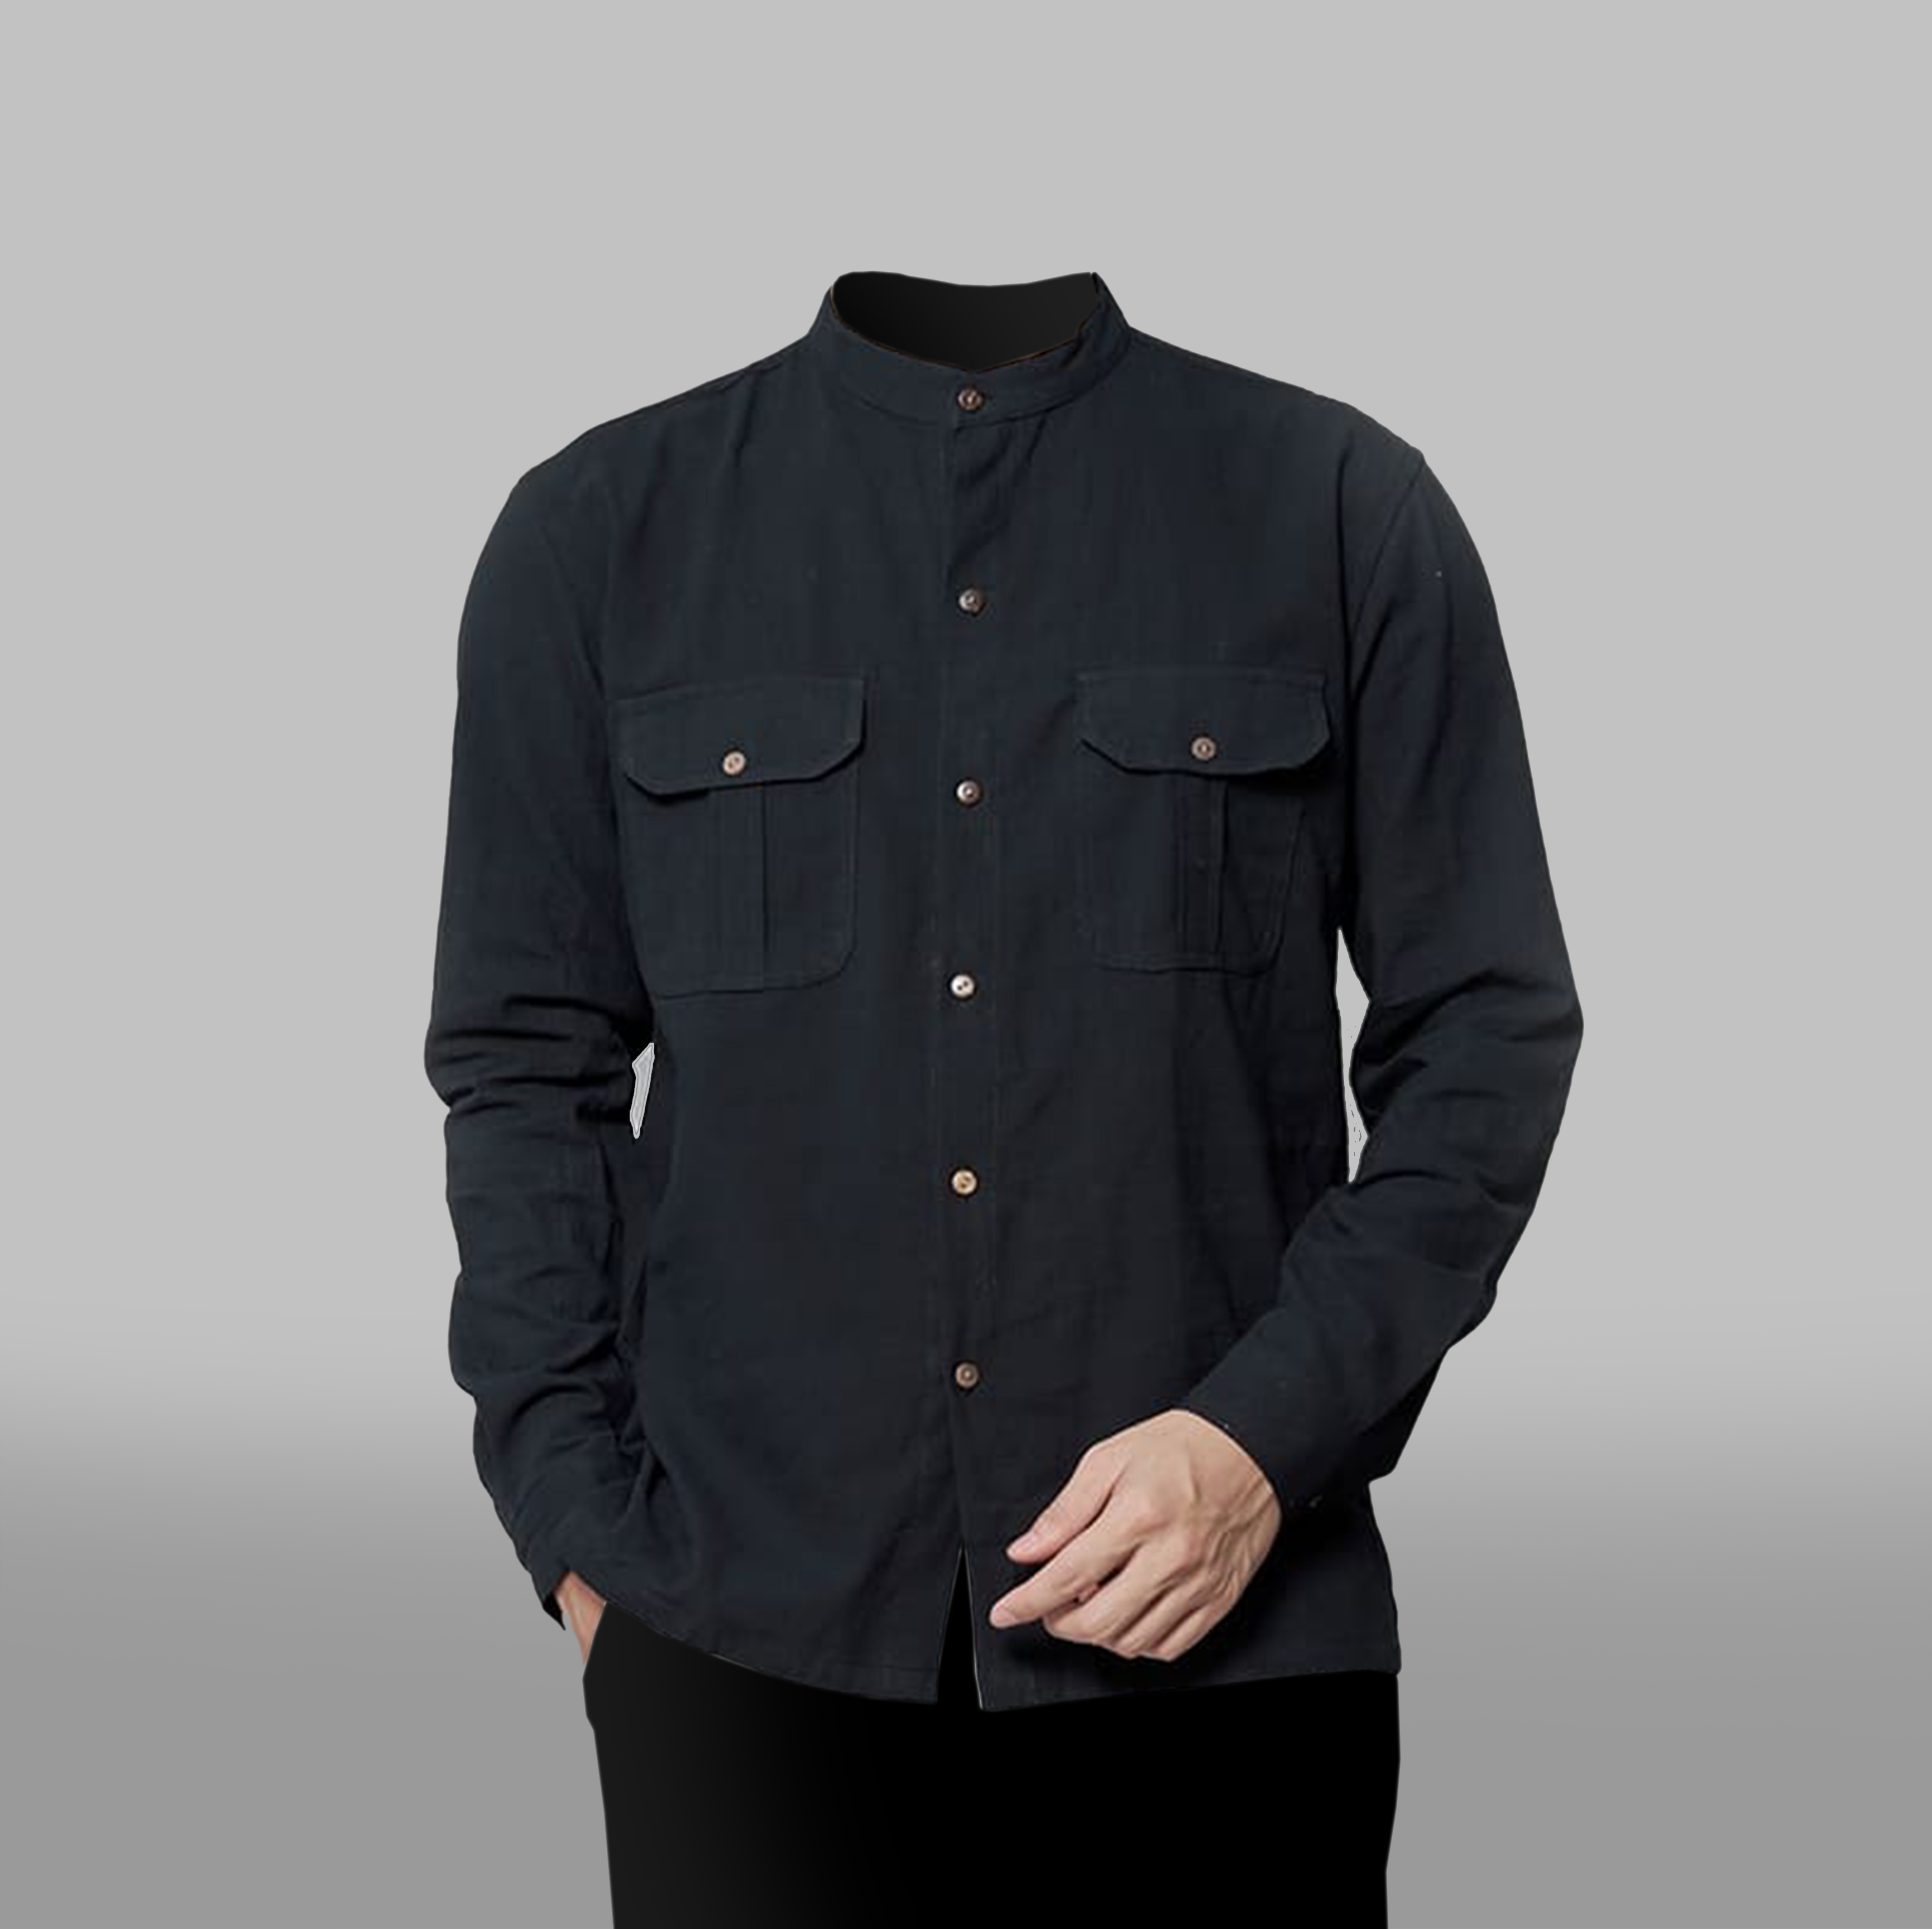 Men's long-sleeved shirt with two chest pockets and round neck - A4LHFA